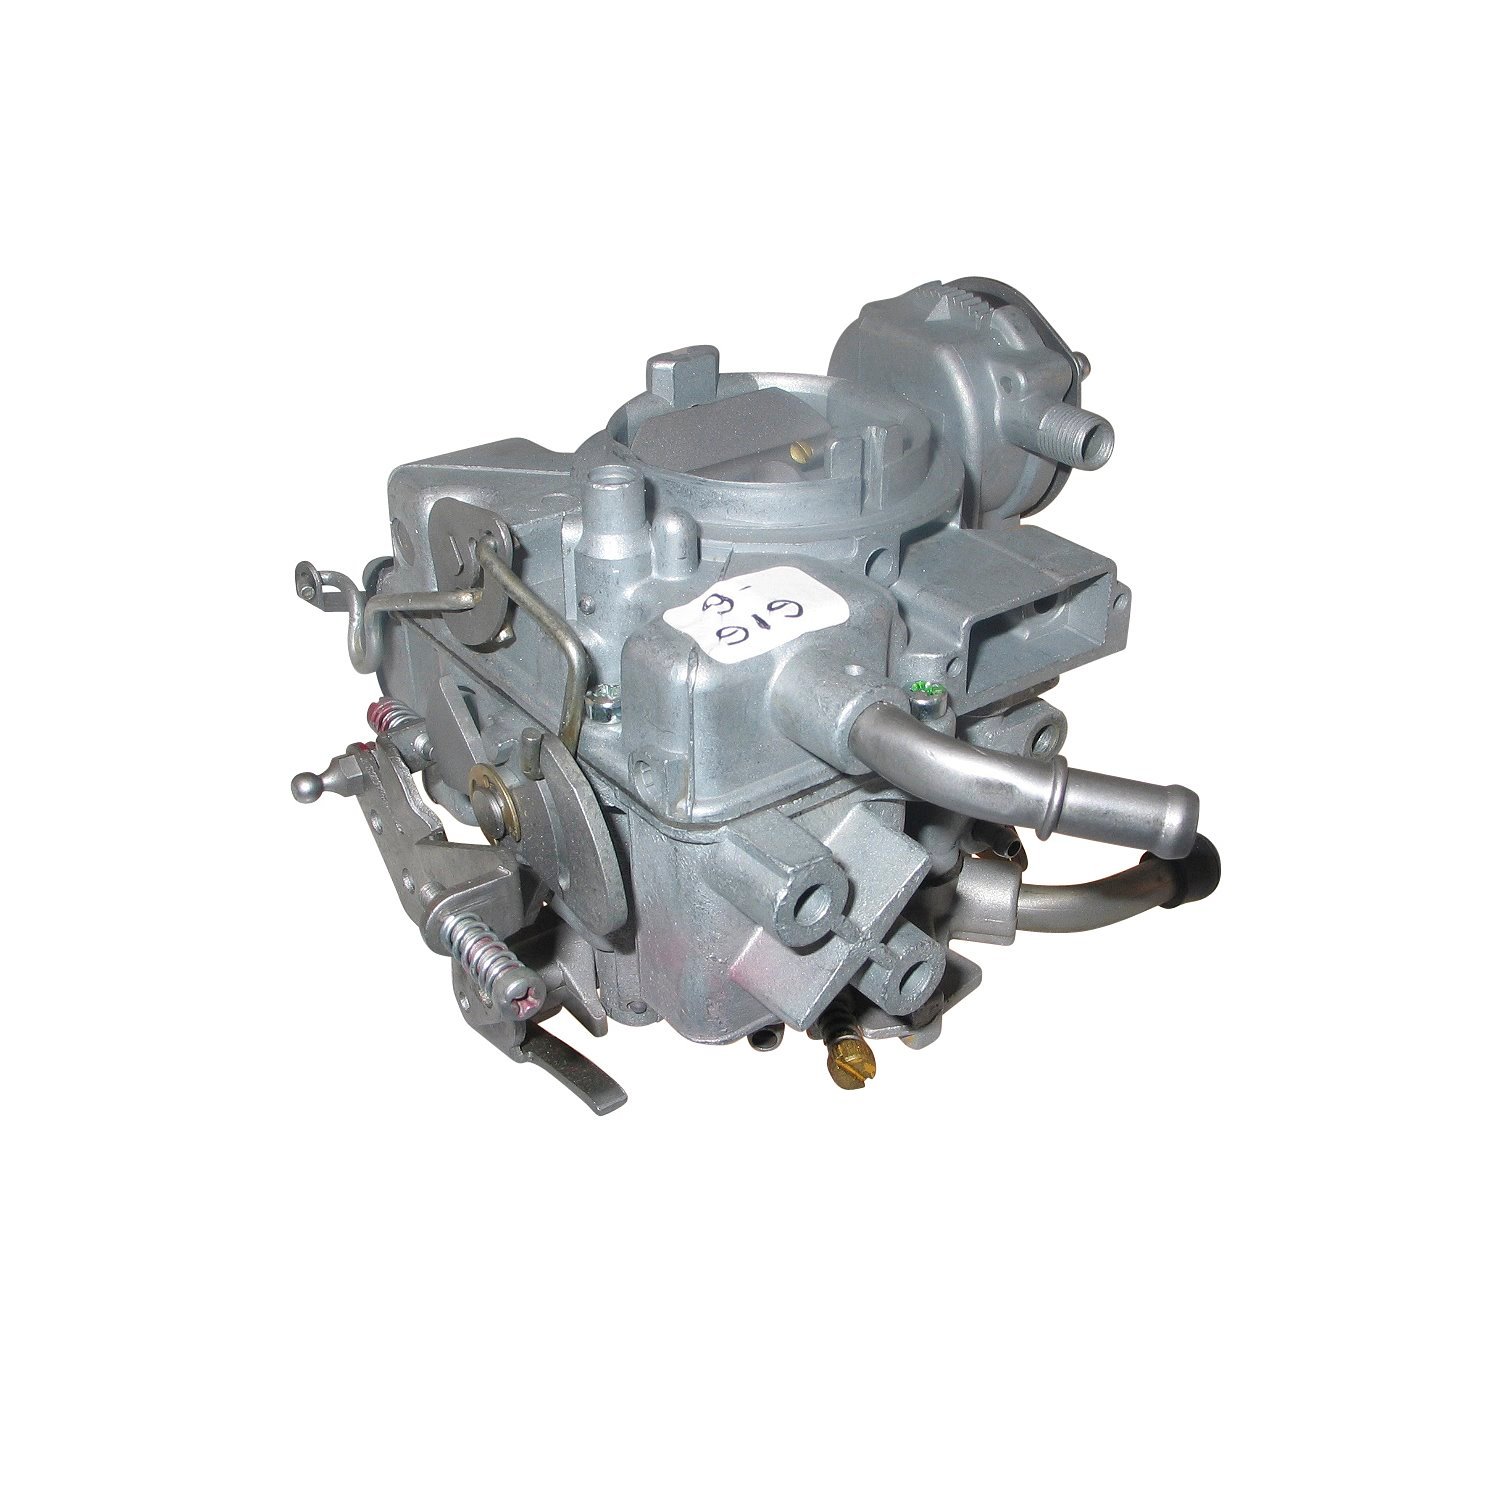 9-928 Holley Remanufactured Carburetor, 1940, Heavy Duty-Style